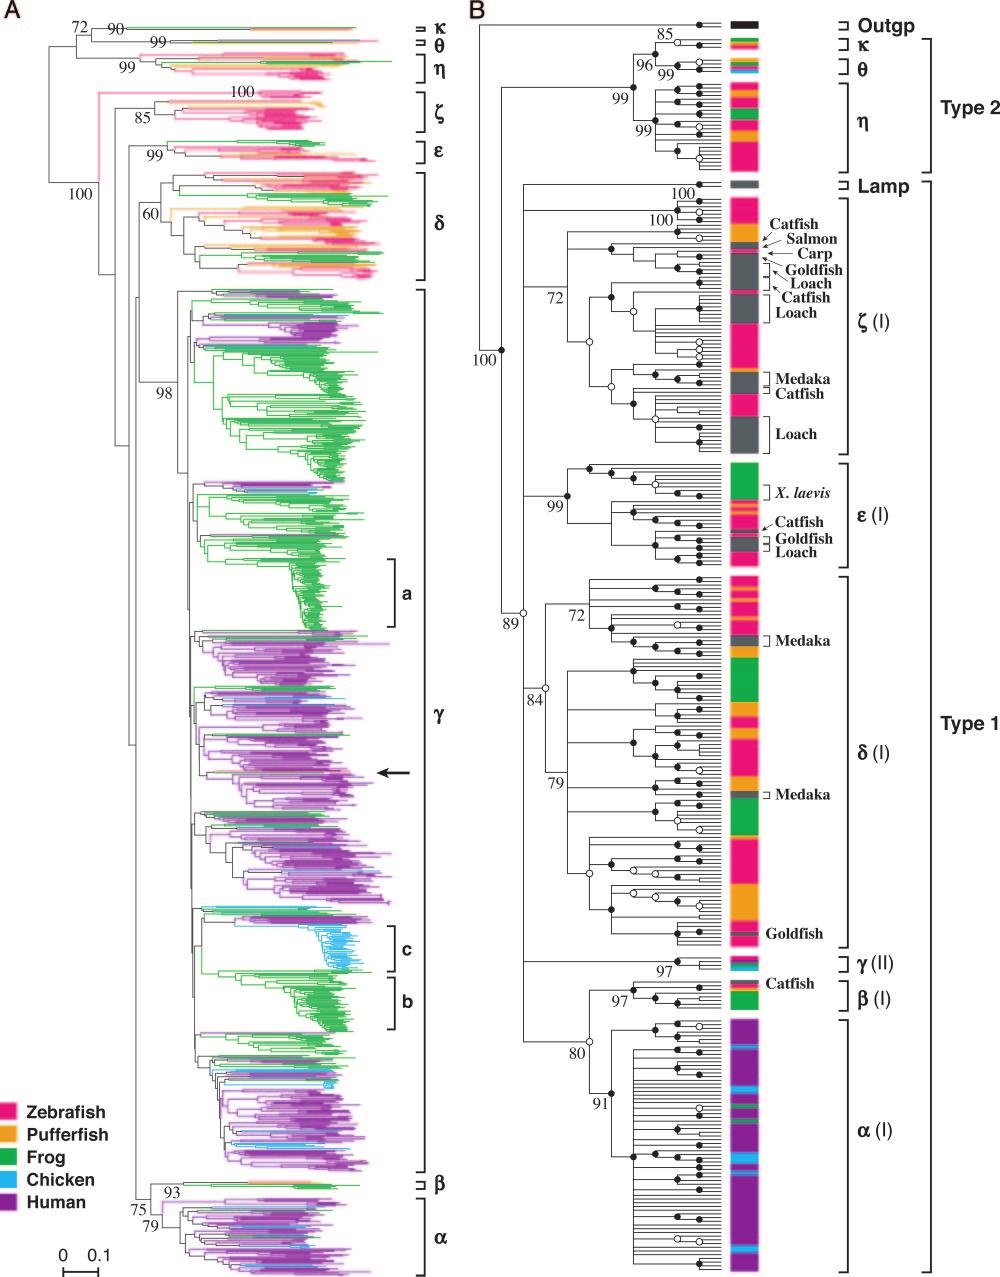 Fig. 1. Phylogenetic trees of vertebrate OR genes. (A) NJ tree for 1,026 functional OR genes. This tree contains 102 zebrafish, 44 pufferfish, 410 X.